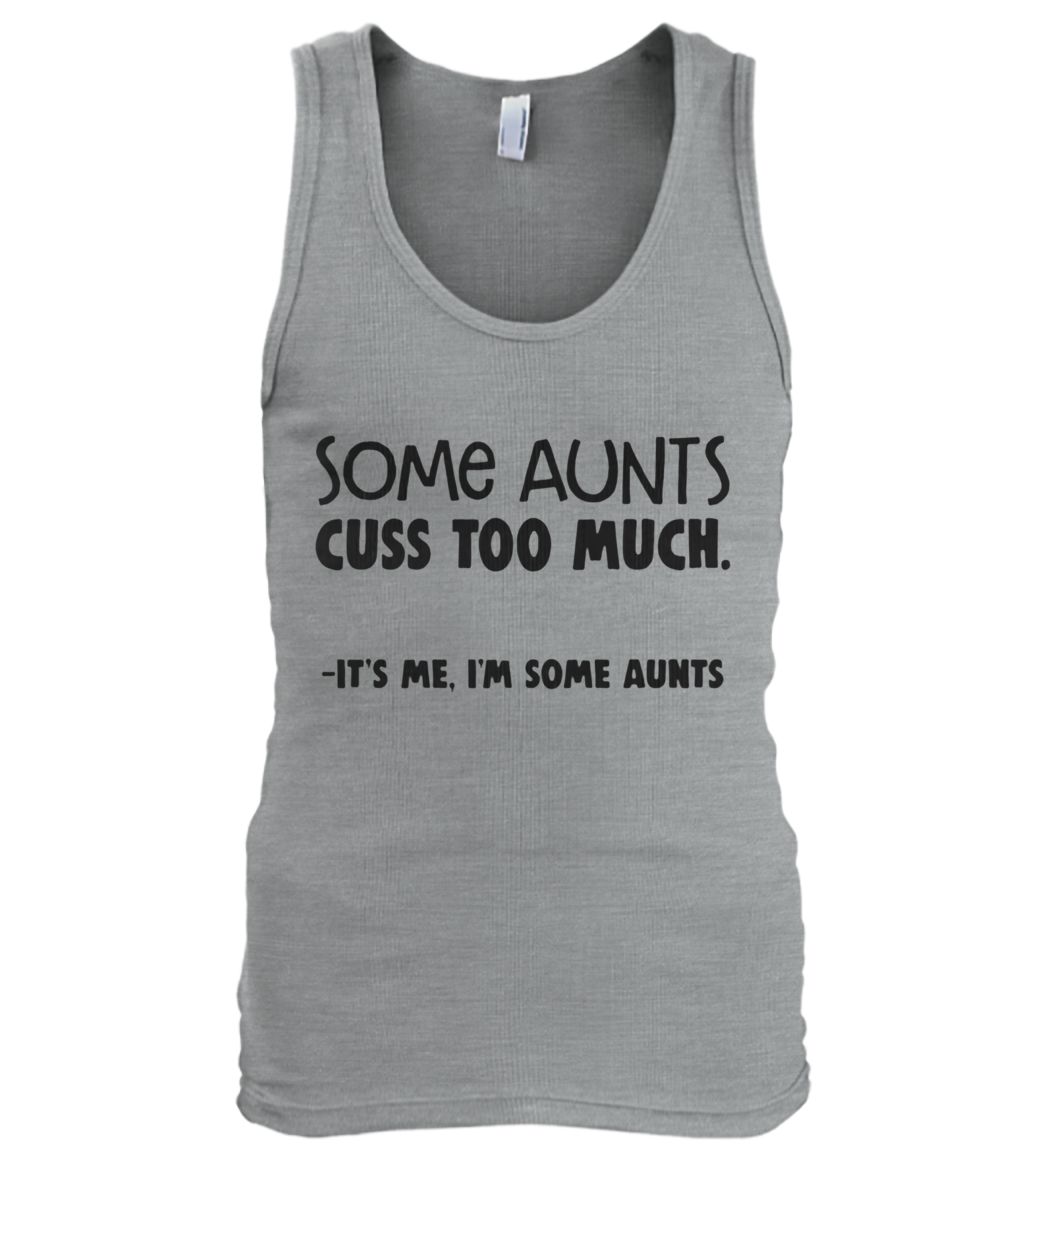 Some aunts cuss too much it's me I'm some aunts men's tank top